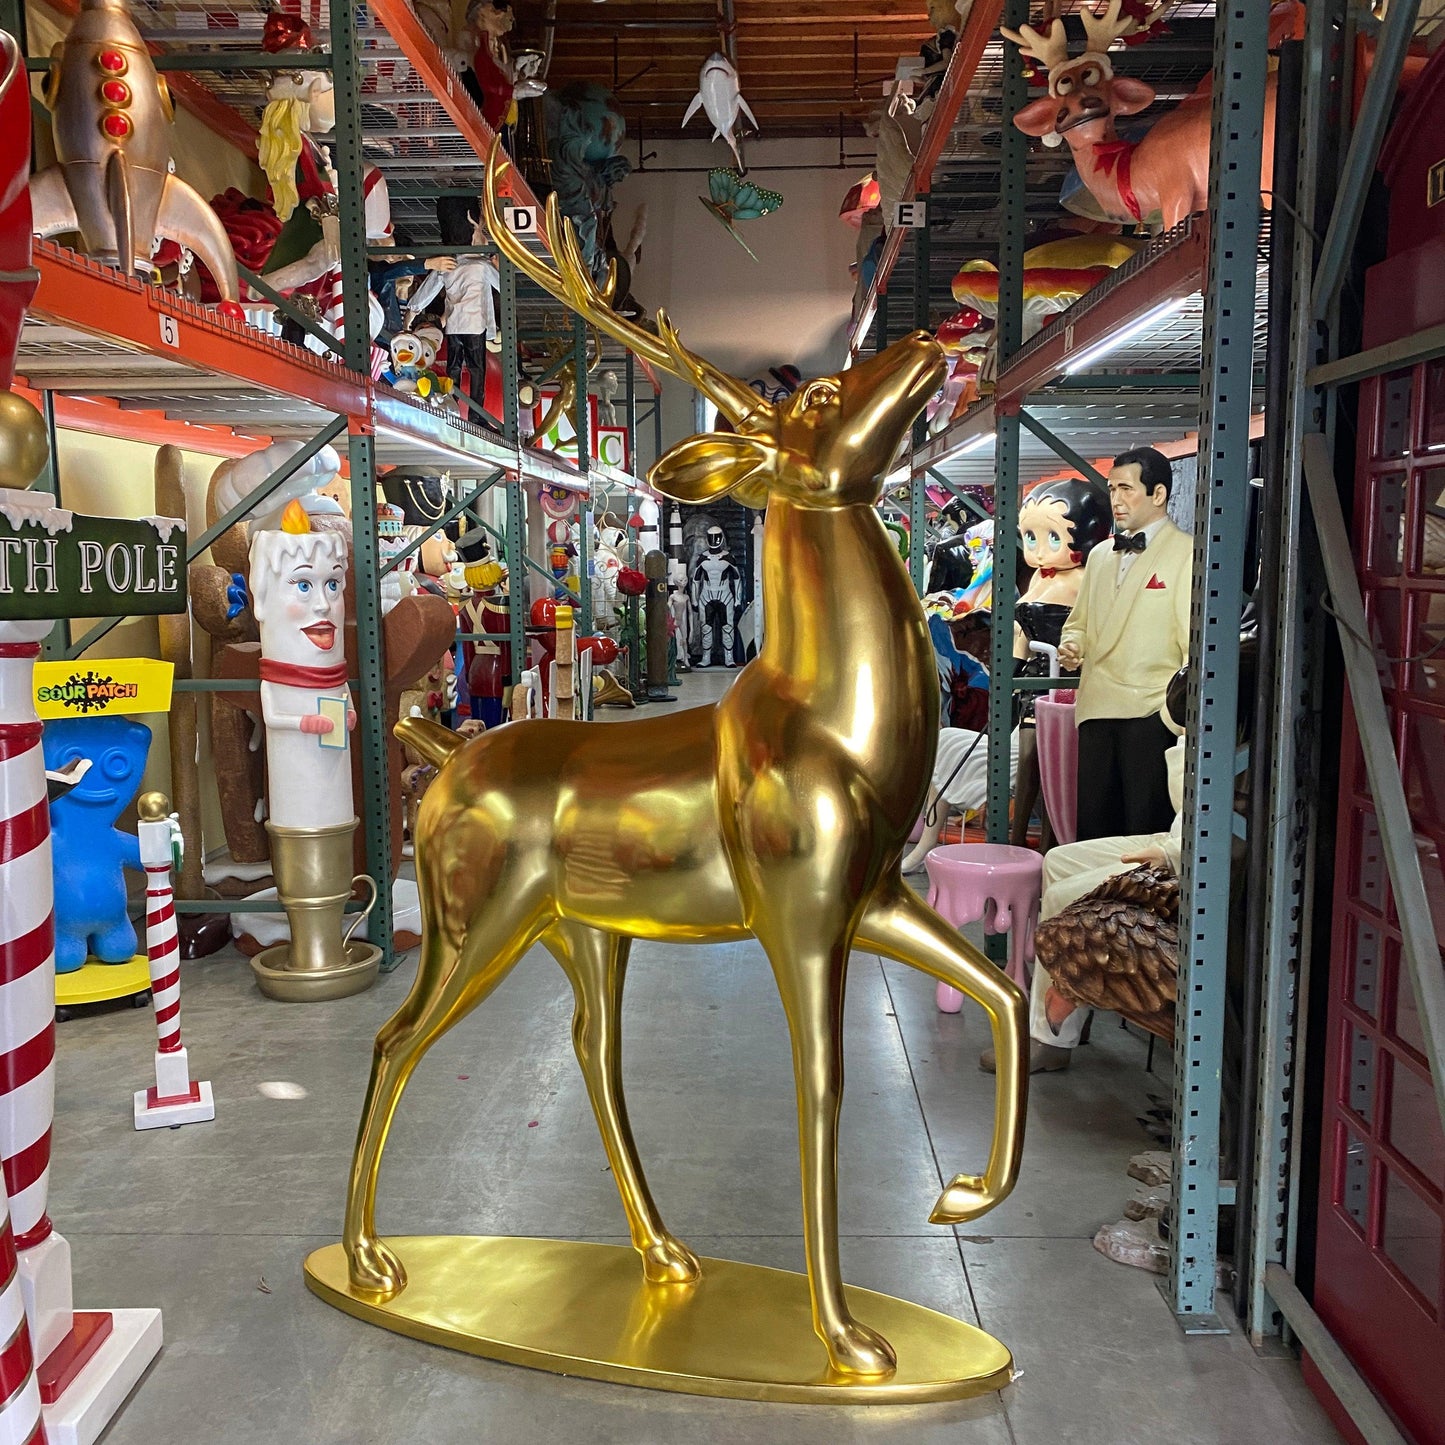 Gold Royal Stag Reindeer With Base Statue - LM Treasures Prop Rentals 